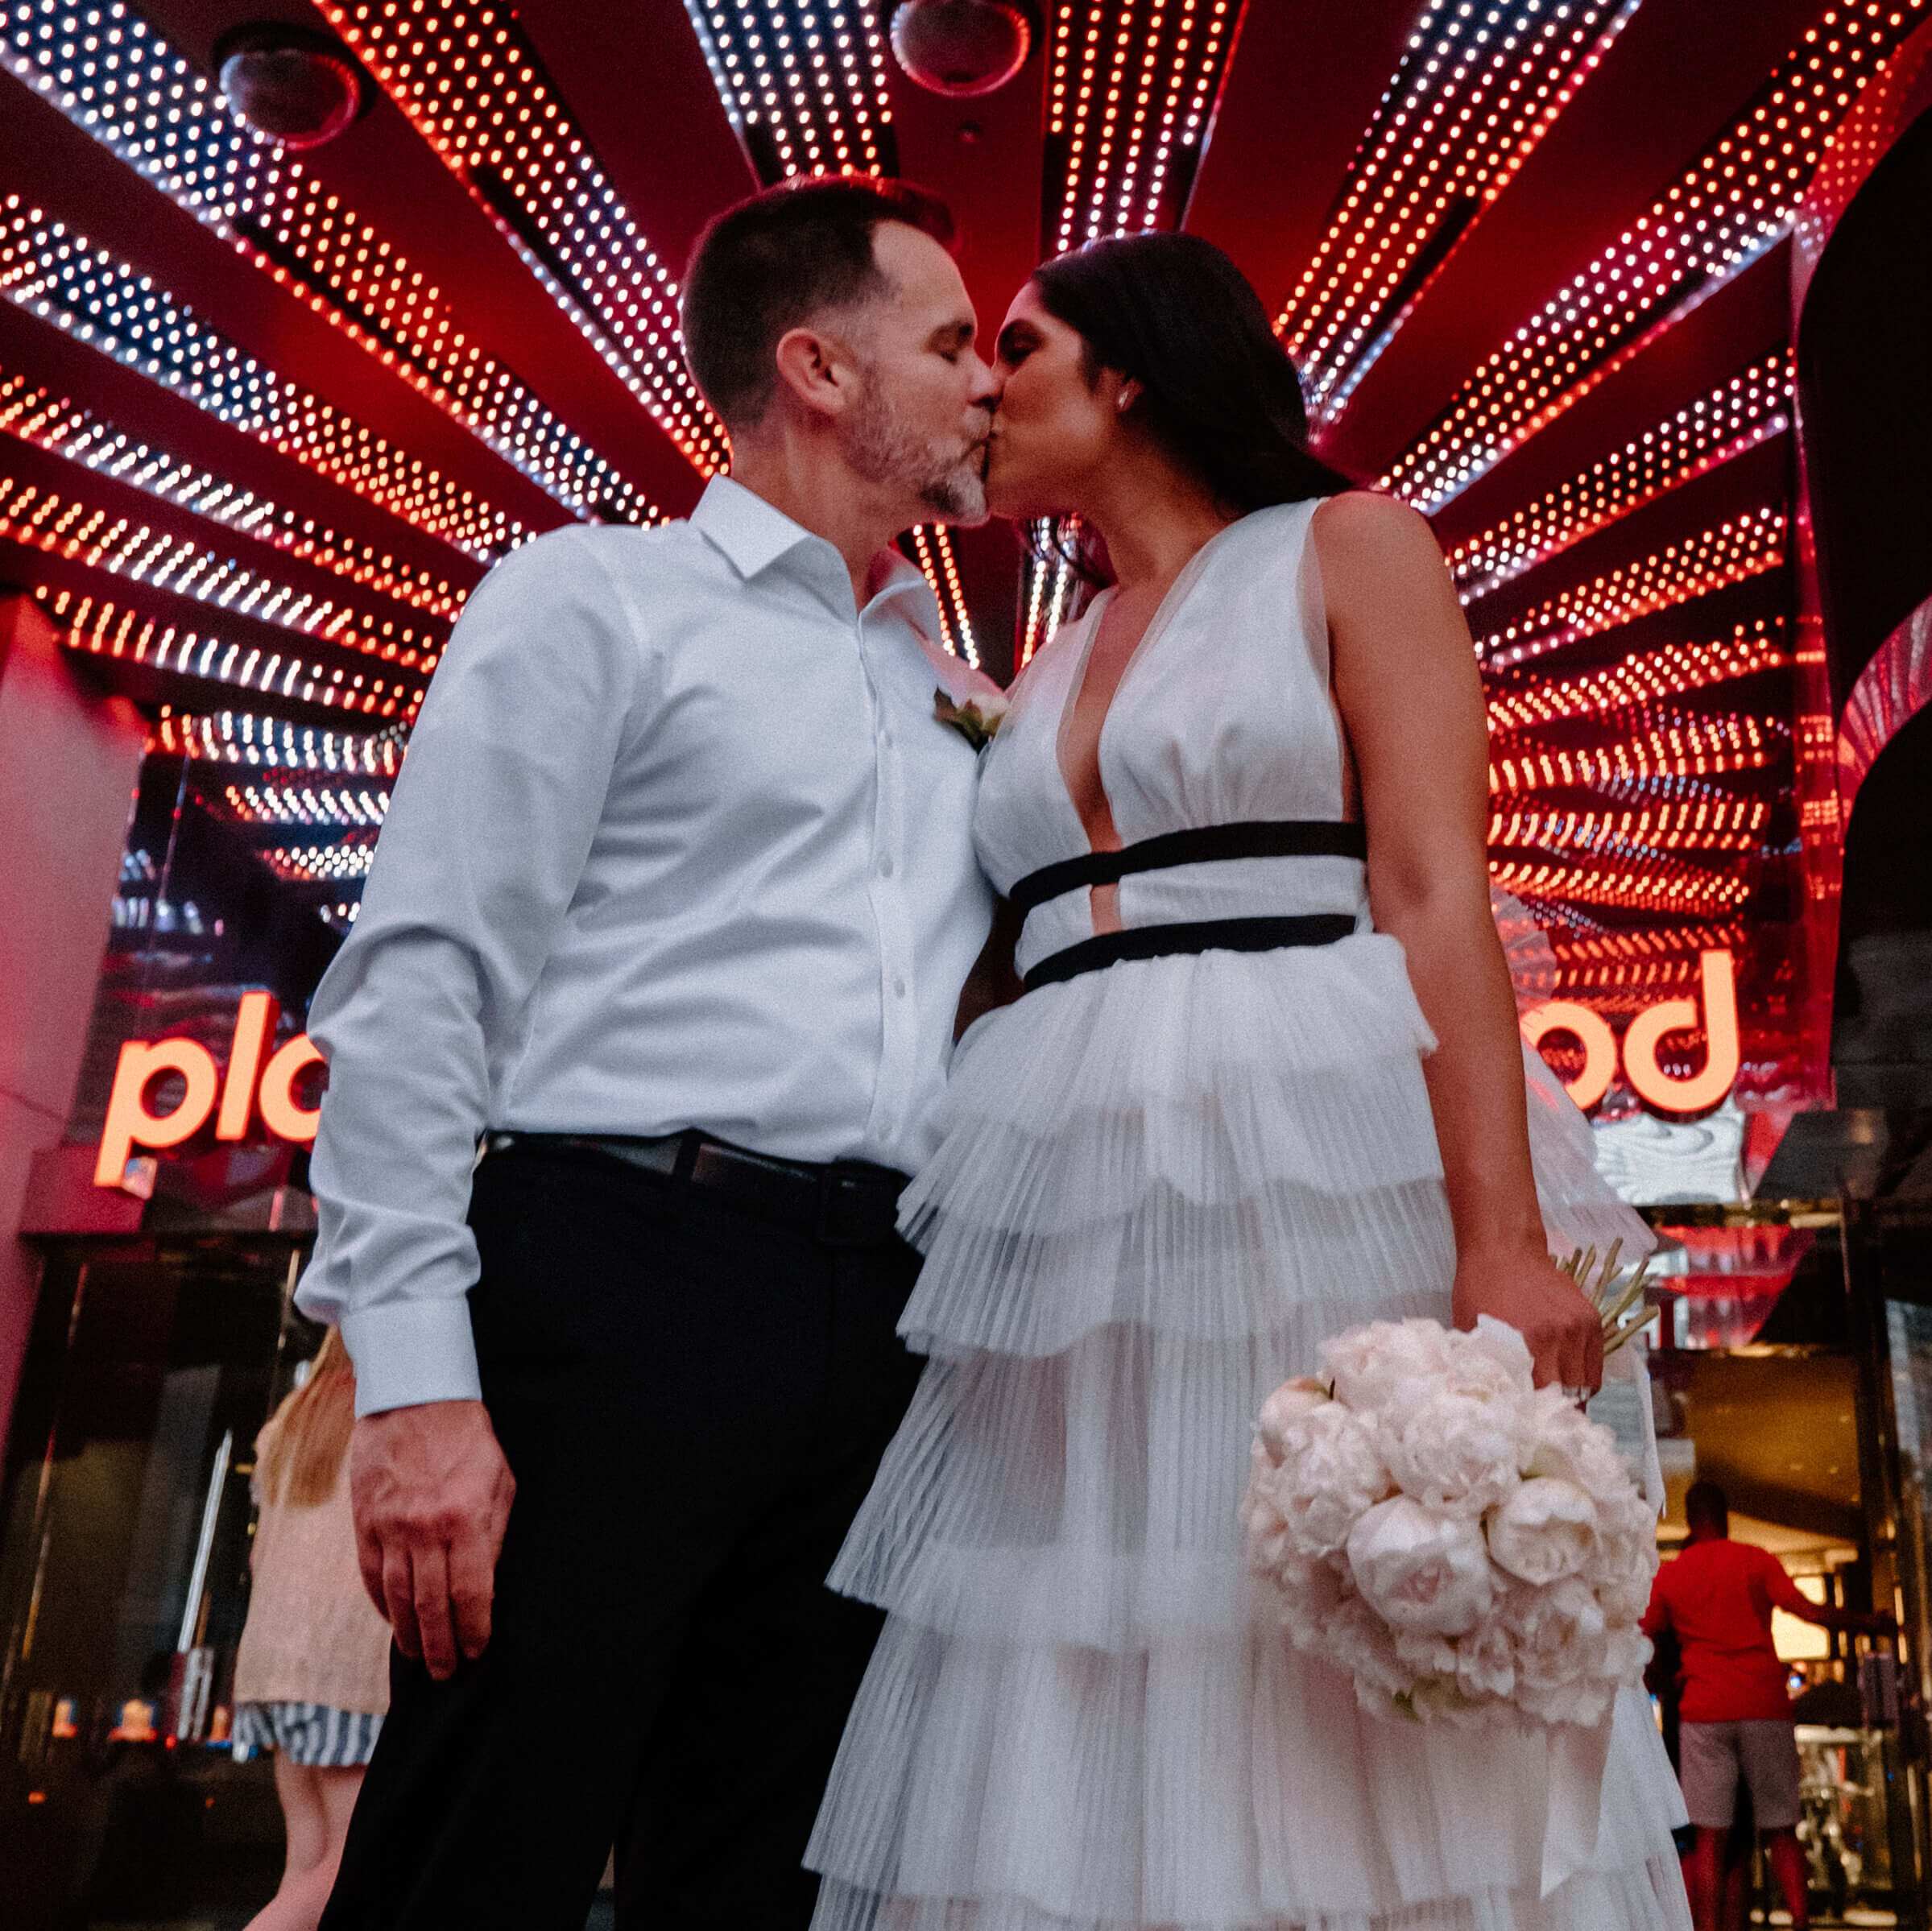 A couple feeling like Elvis and Priscilla wedding at Planet Hollywood